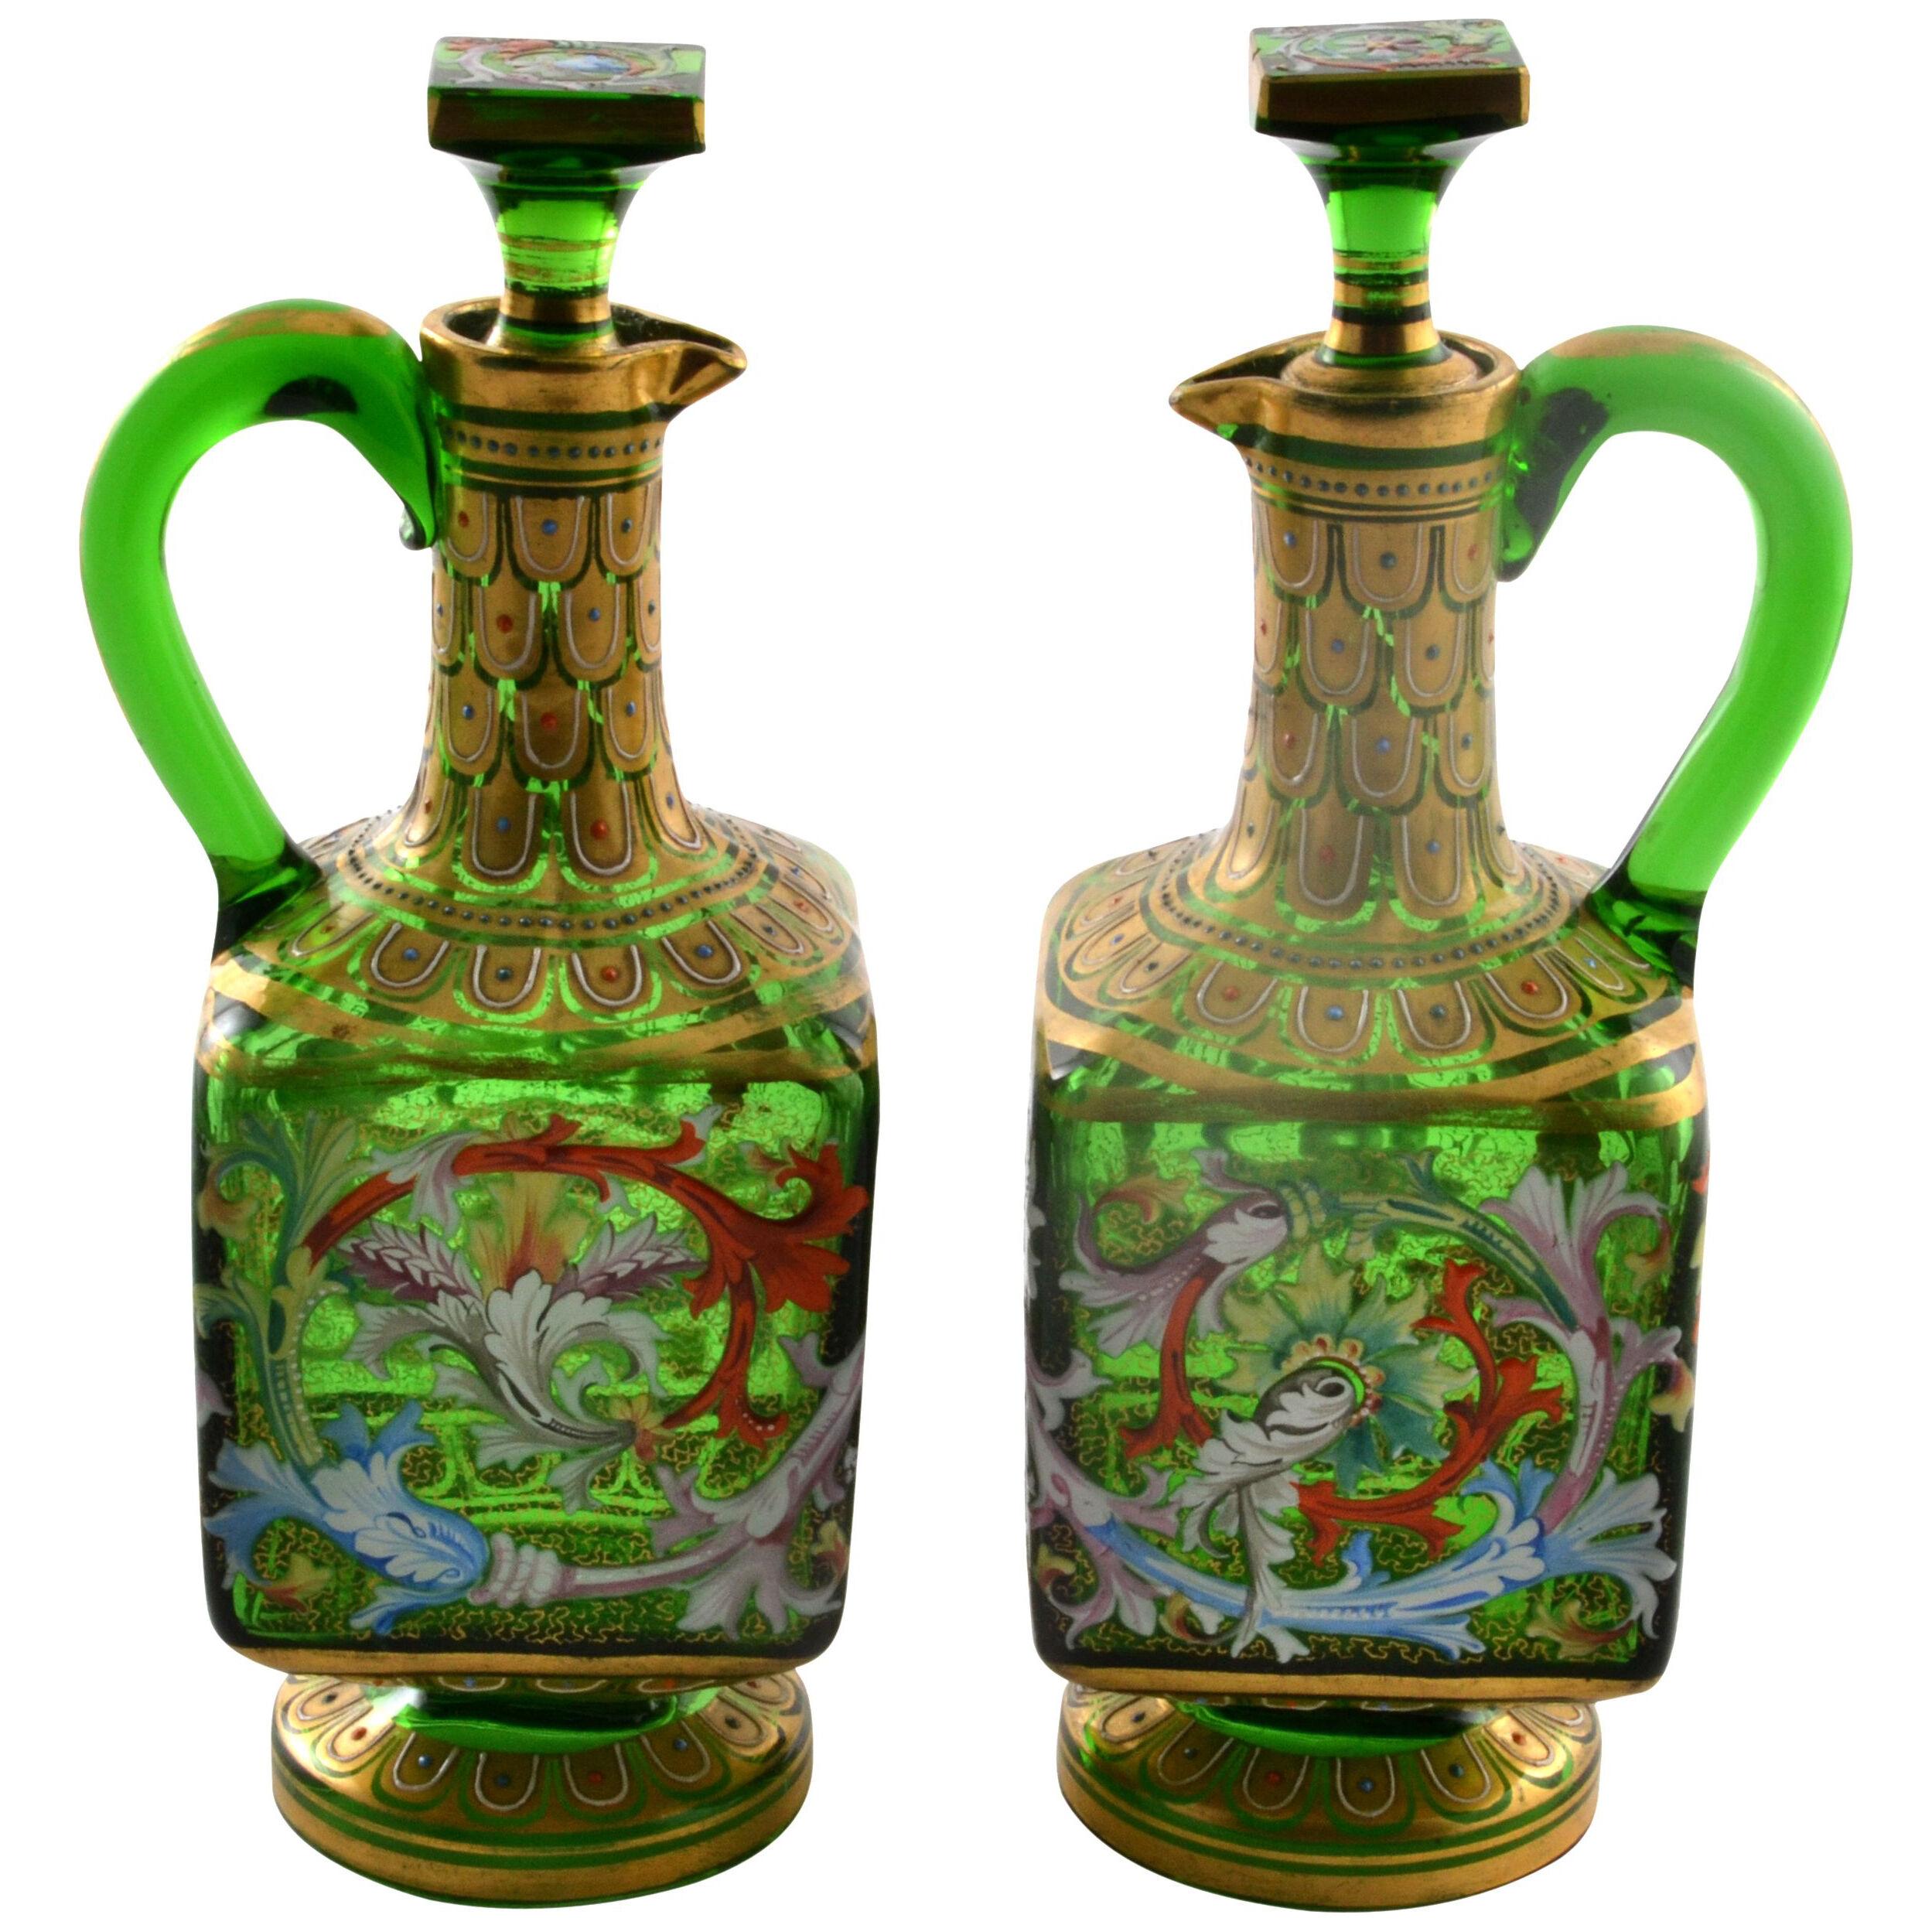 Moser Pair of Cruets – Decanters by Meyr Neffe c.a. 1885